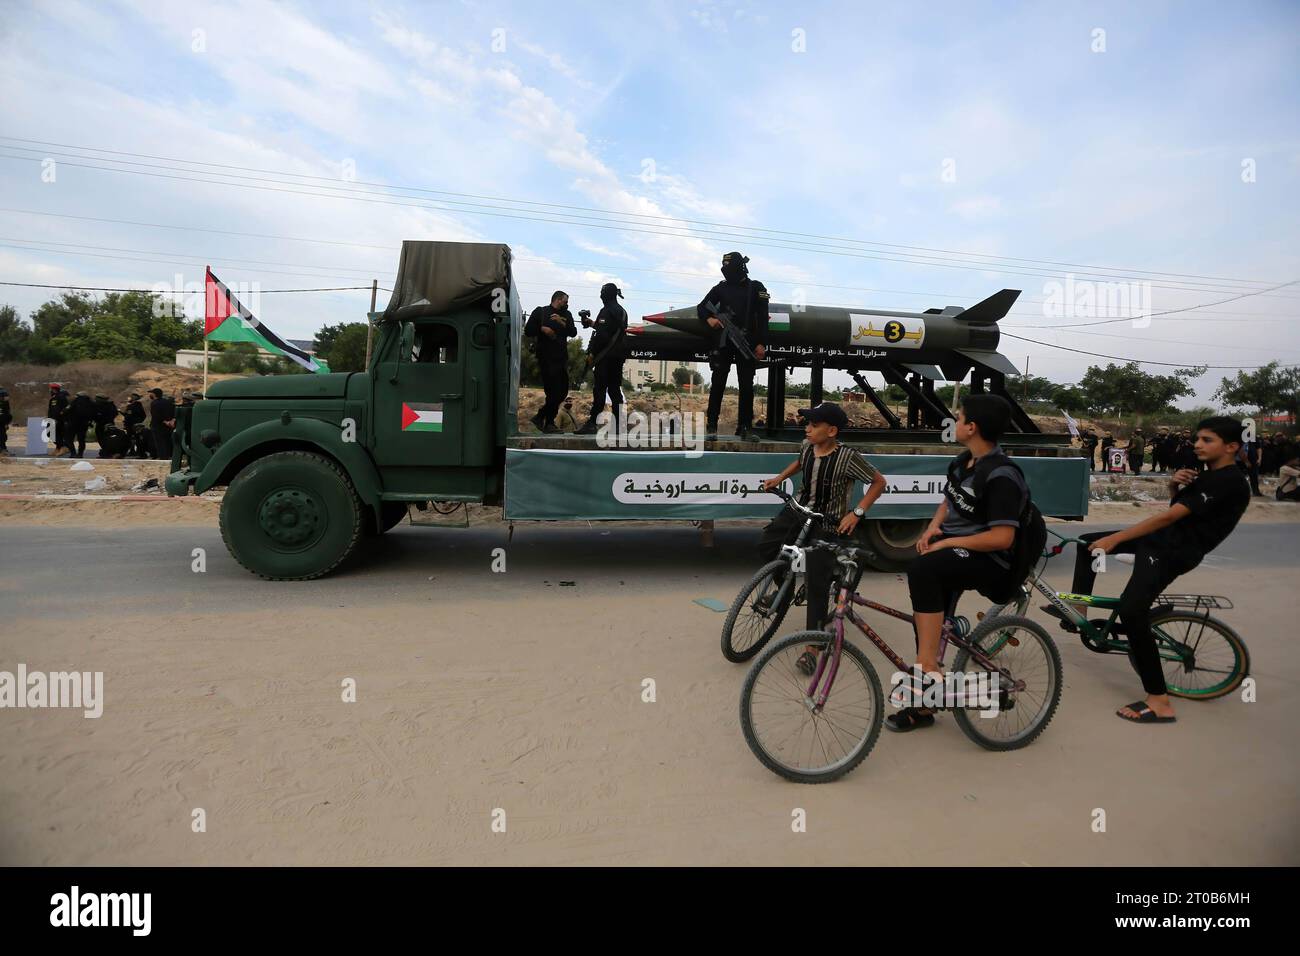 Palestinian children watch members of the Al-Quds Brigades, the military wing of the Islamic Jihad movement, participating in an anti-Israel military parade on the occasion of the 36th anniversary of the founding of the movement in Gaza City. Stock Photo